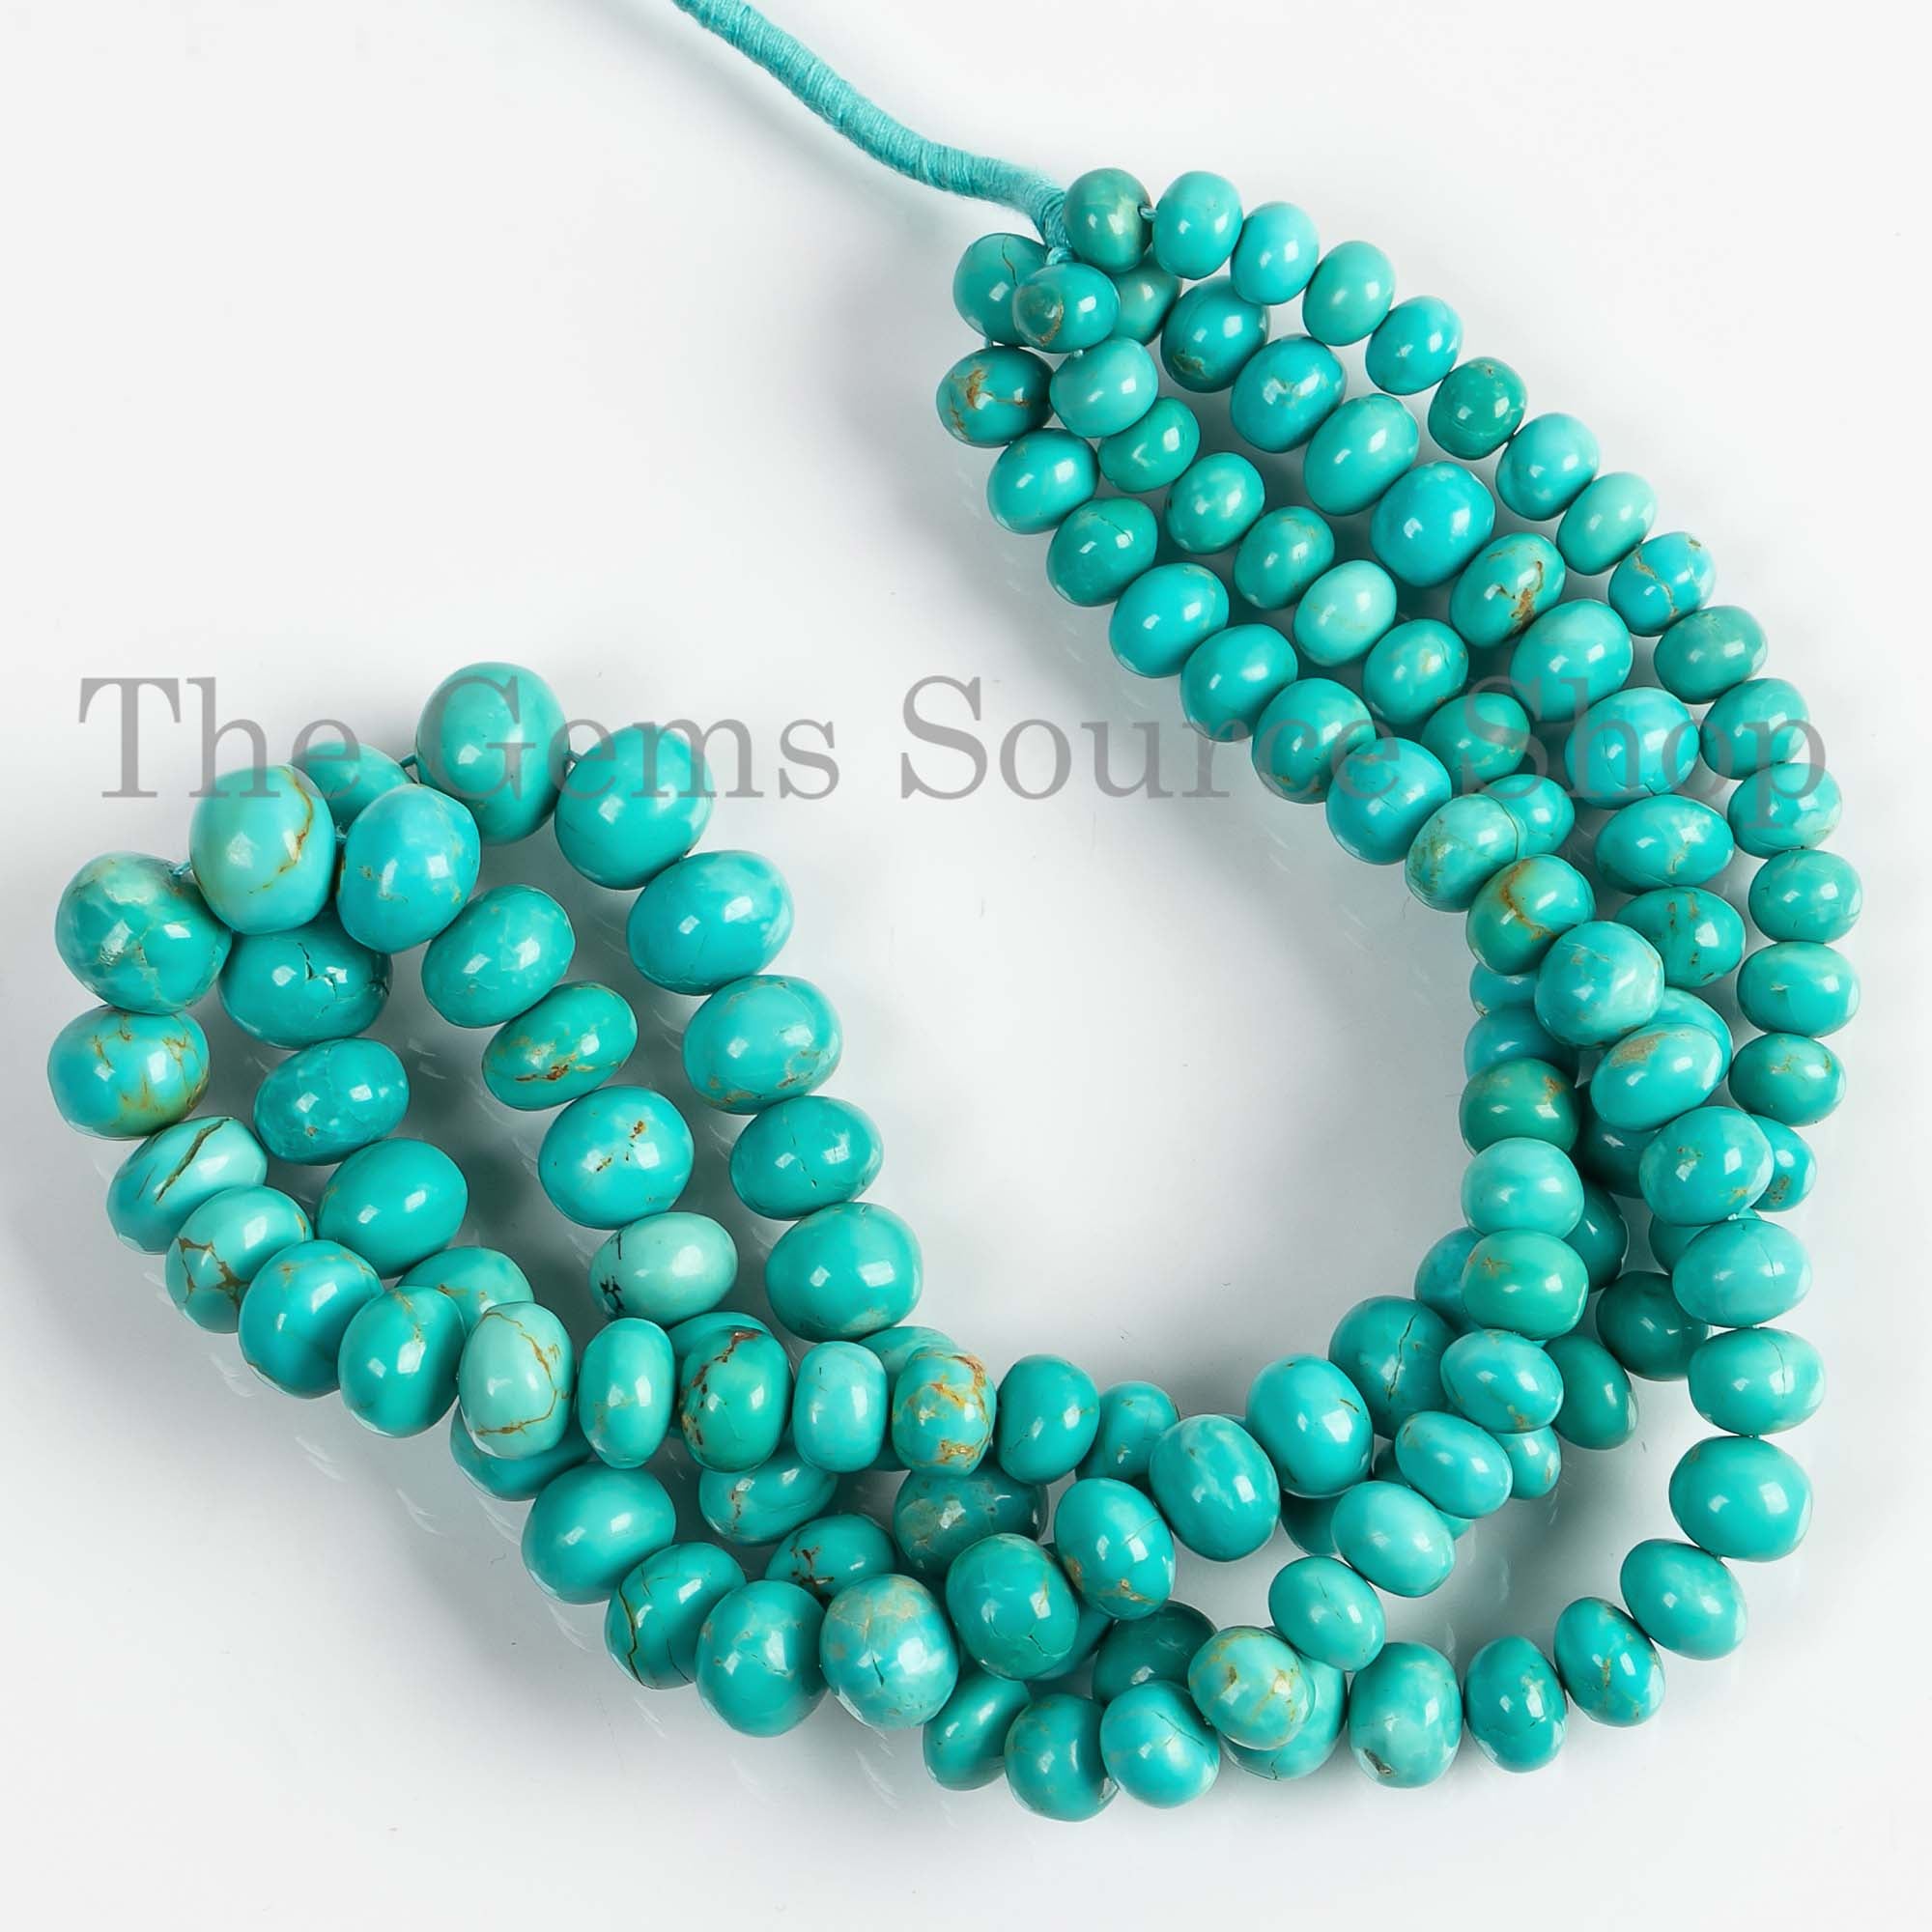 7-11 mm Turquoise Smooth Rondelle Beads, Loose Turquoise Strand, Turquoise Gemstone